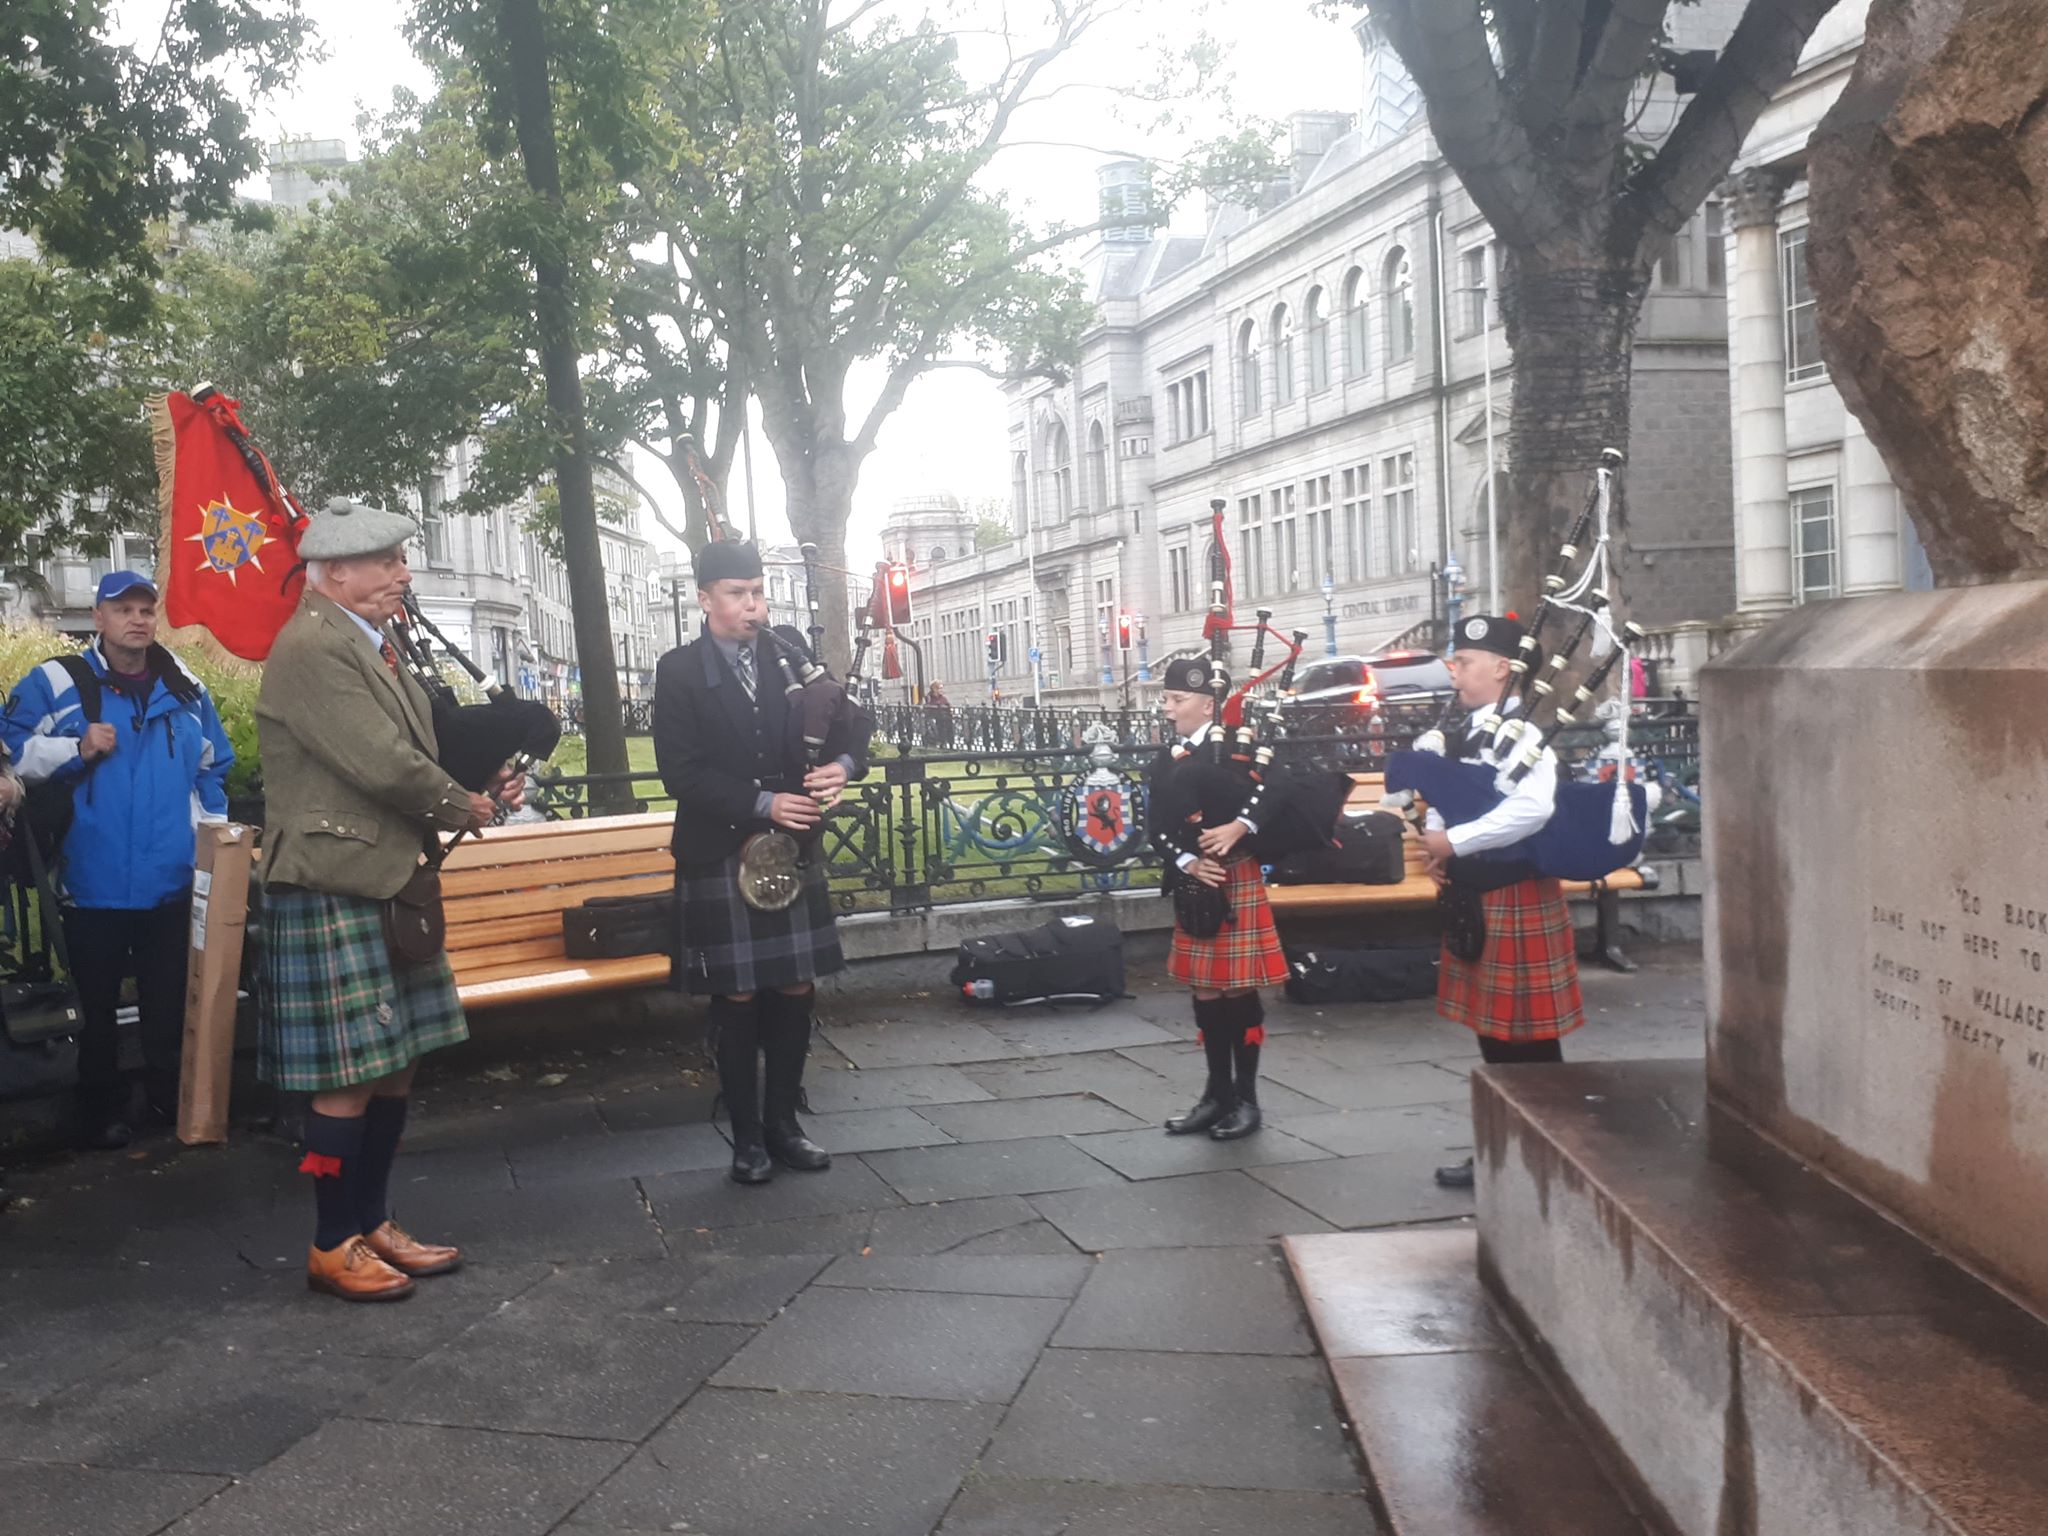 Pipers play at the Wallace statue, Aberdeen.